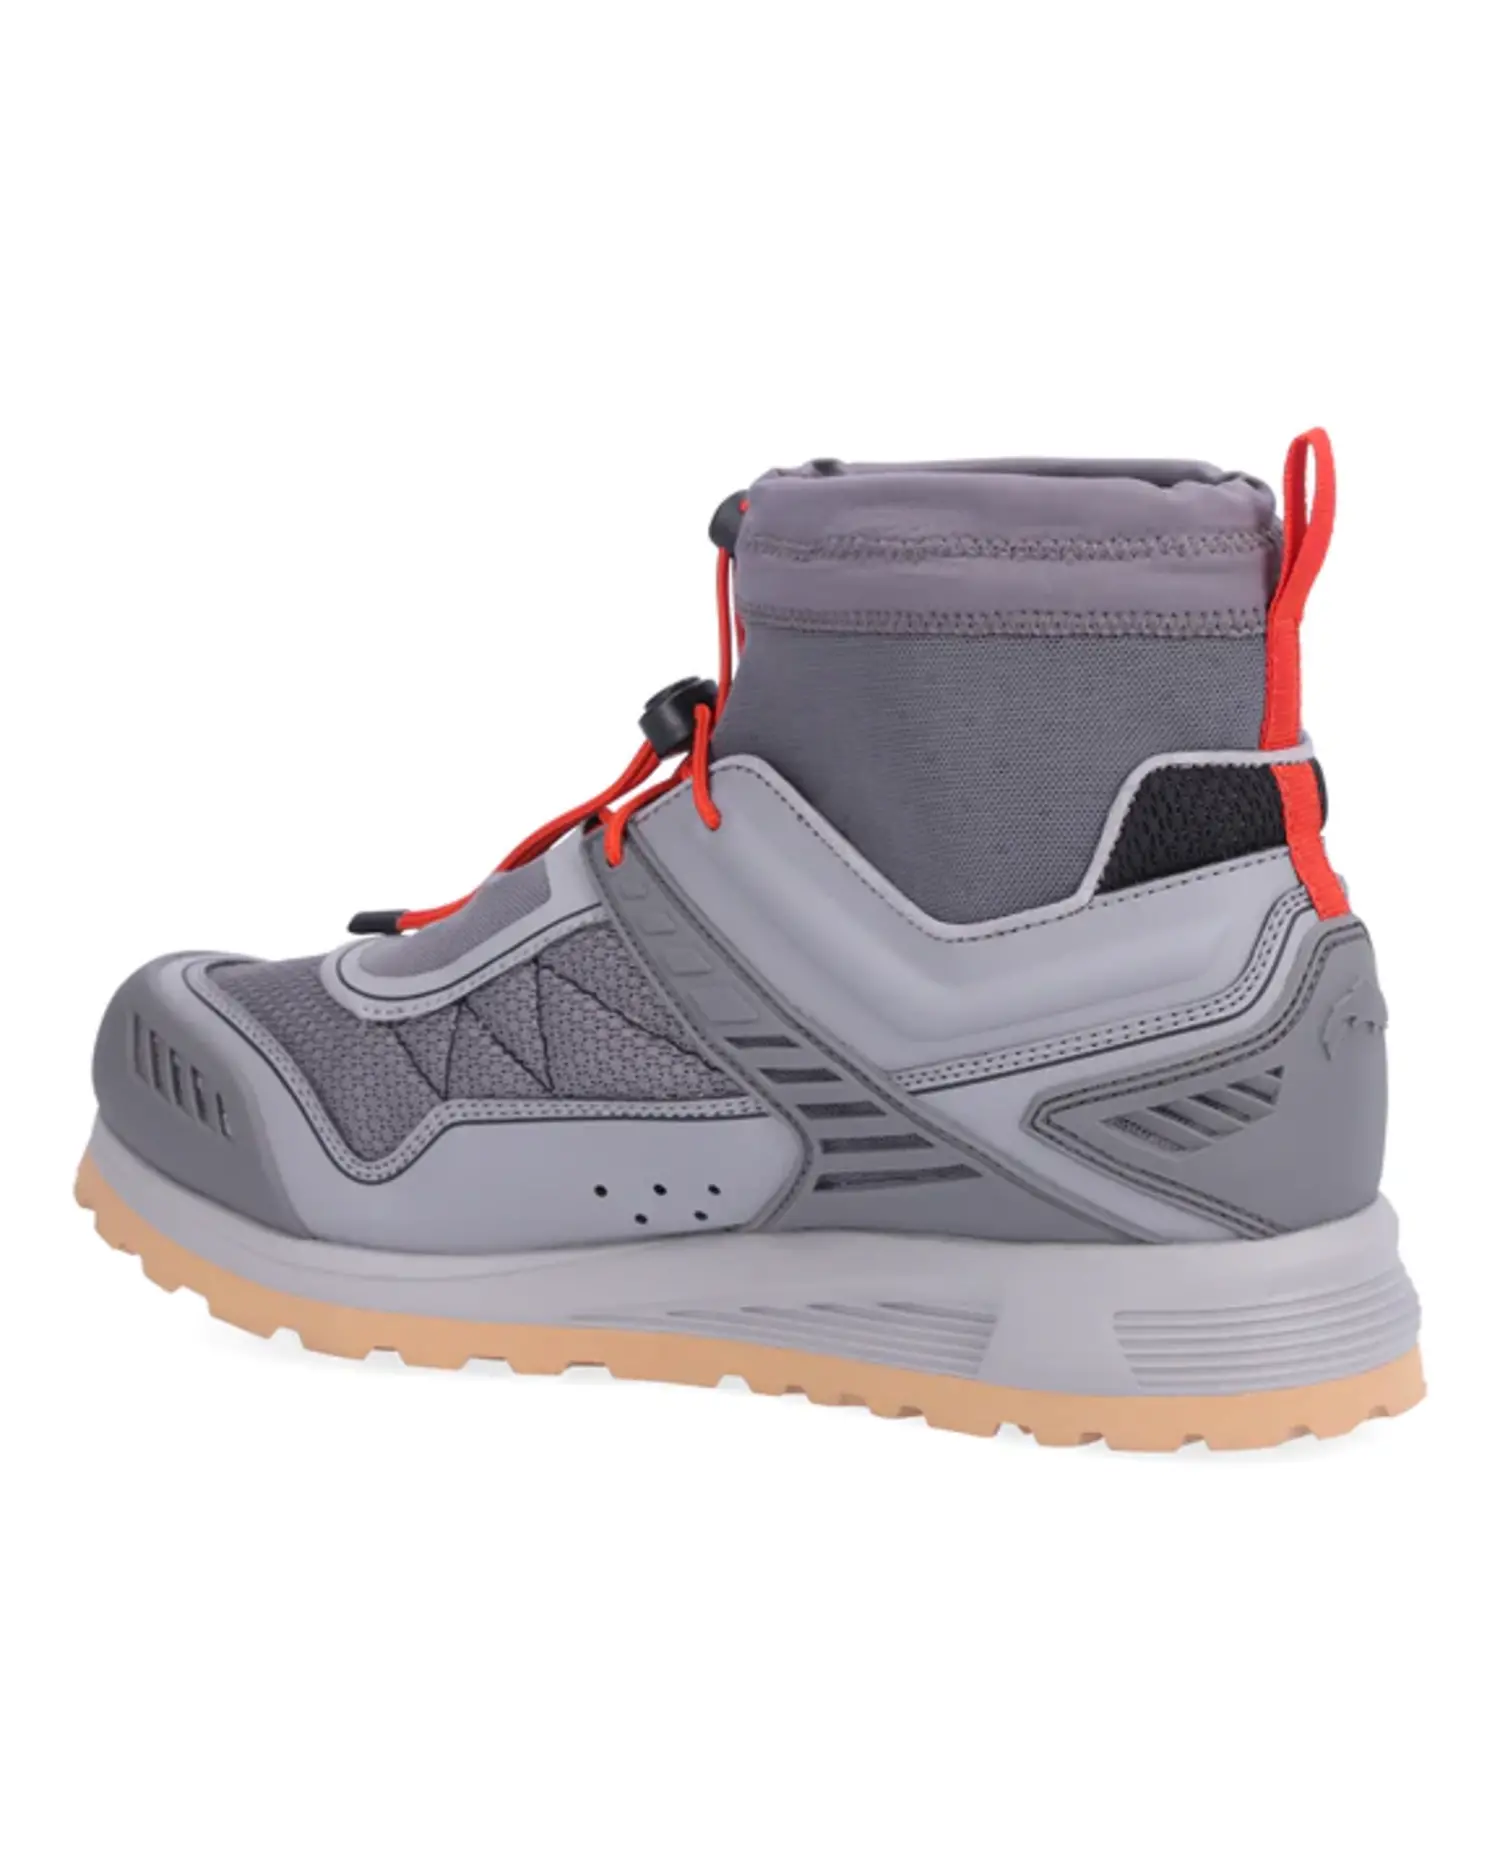 Ms Flyweight Access Wet Wading Shoe - The Fish Hawk